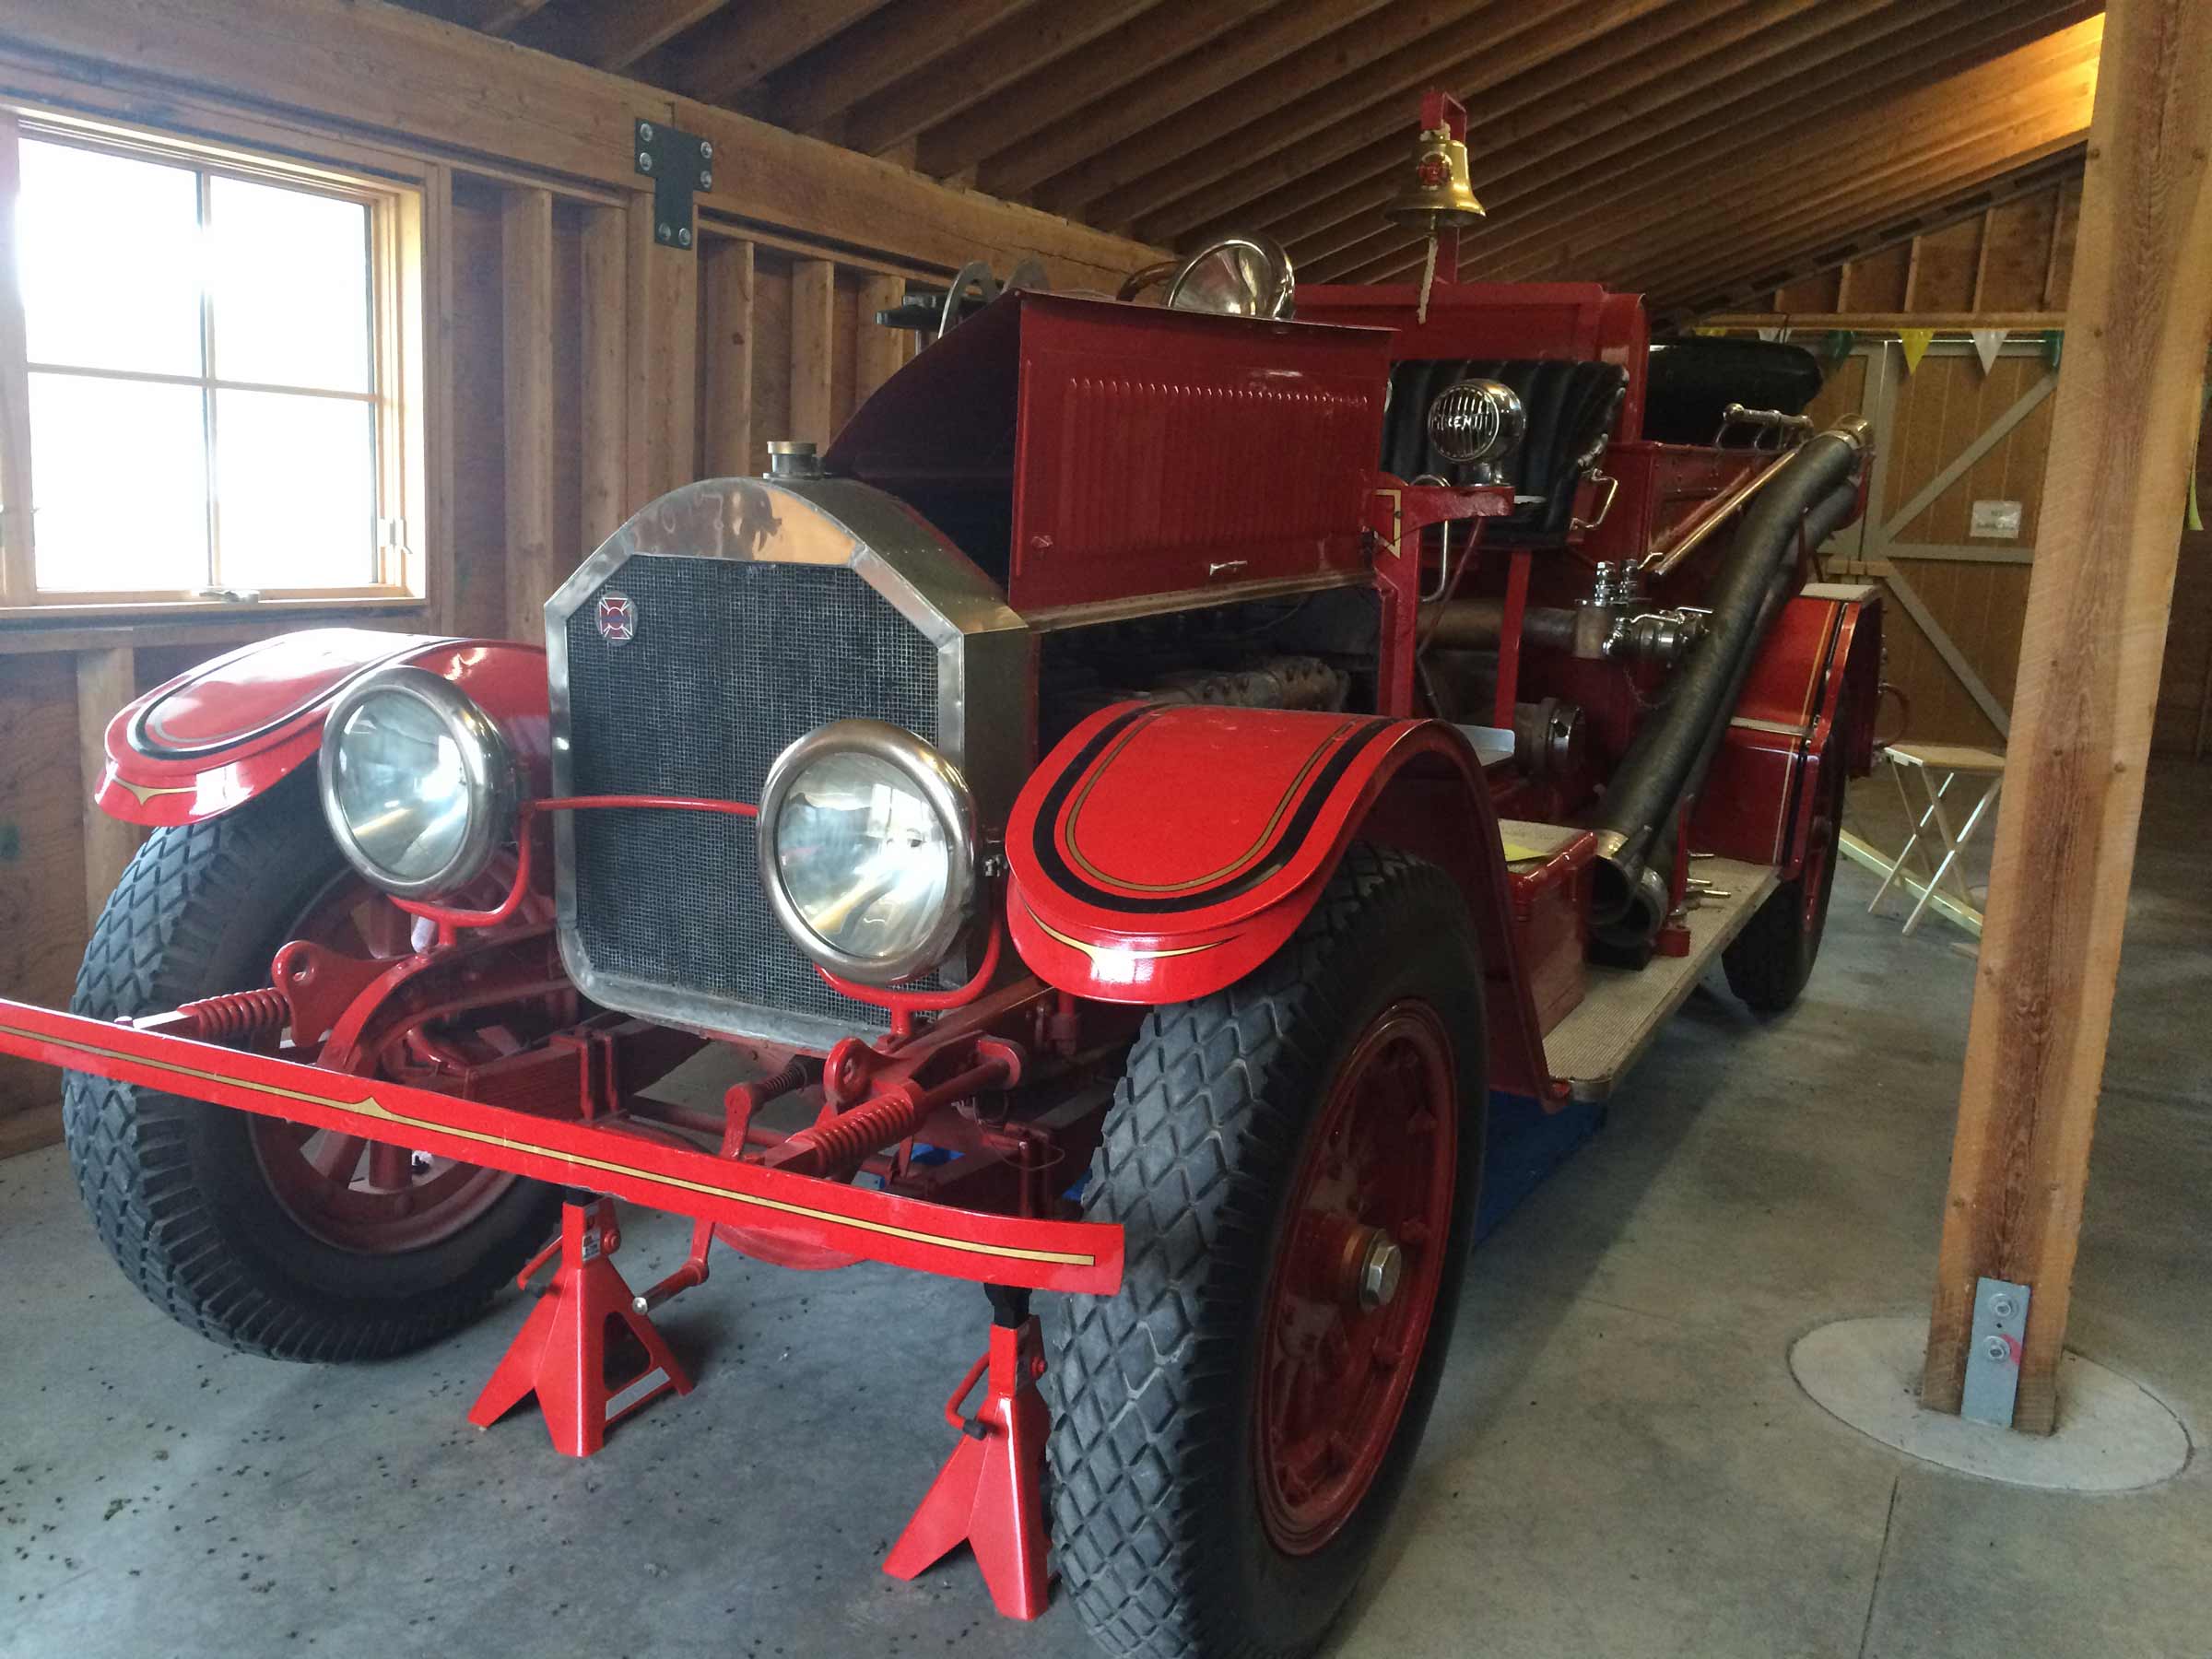 The 1918 LaFrance fire engine